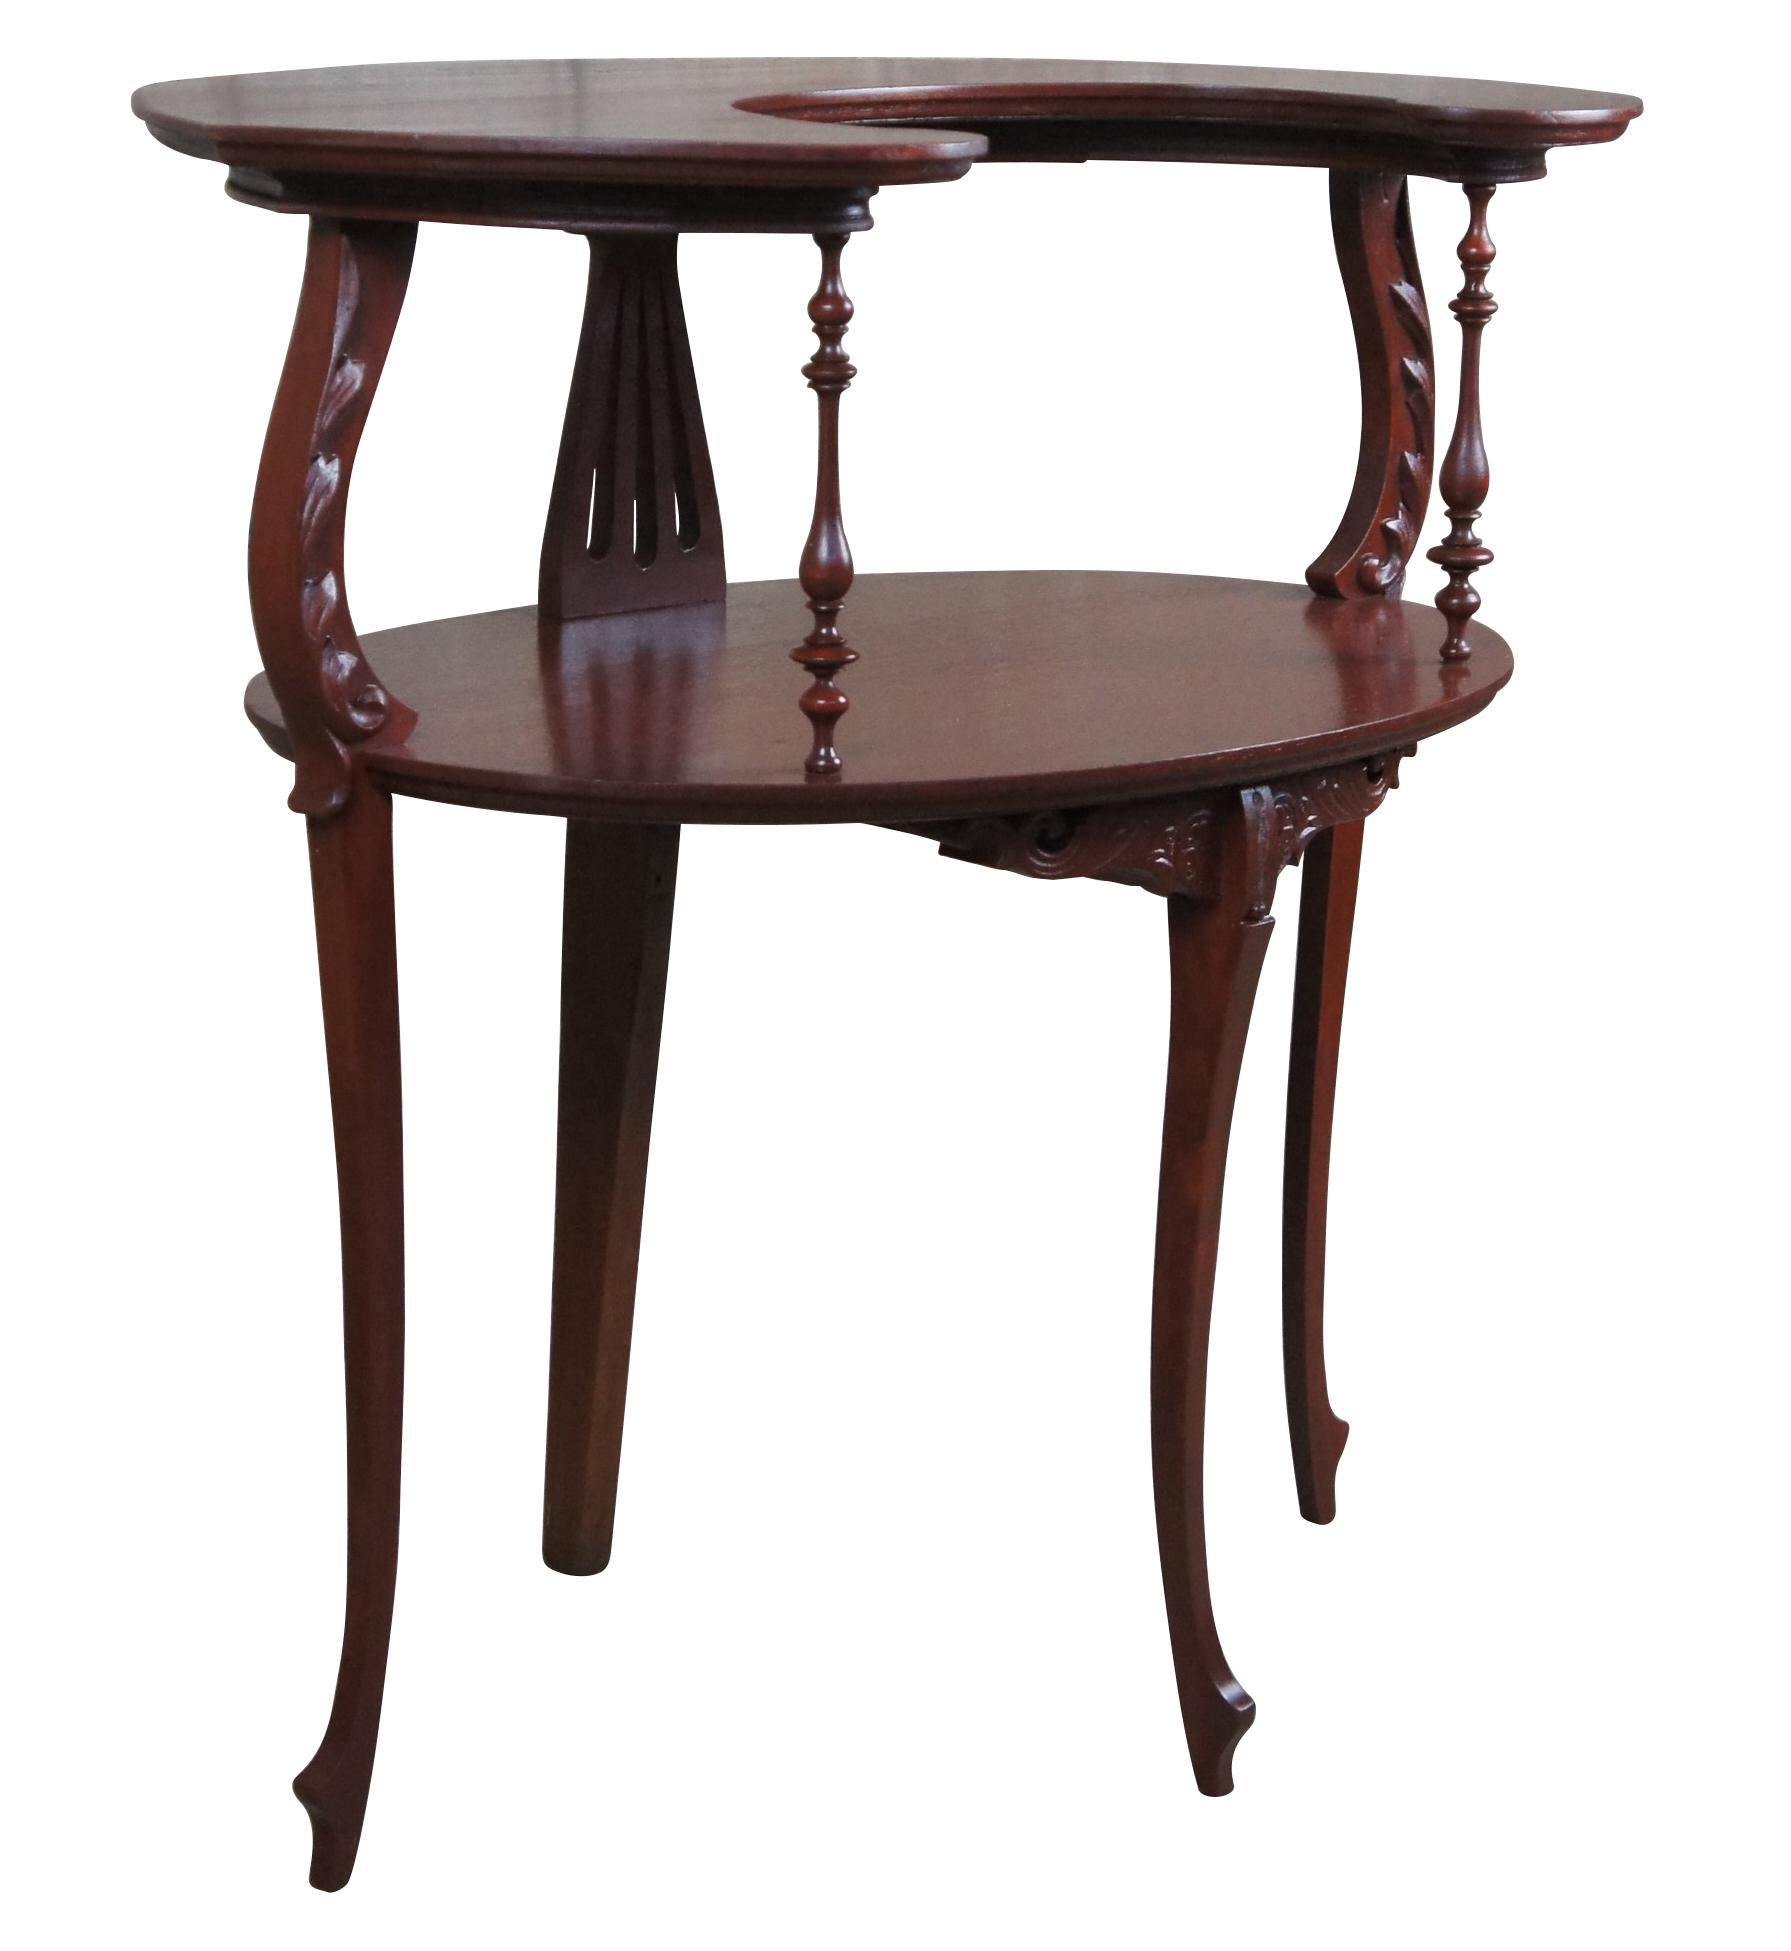 Elegant early 20th century oval tiered accent table. In the Victorian era these little tables were most often used for serving dessert. The table is made from mahogany with a crescent moon or demilune top surface supported by spindled, pierced and